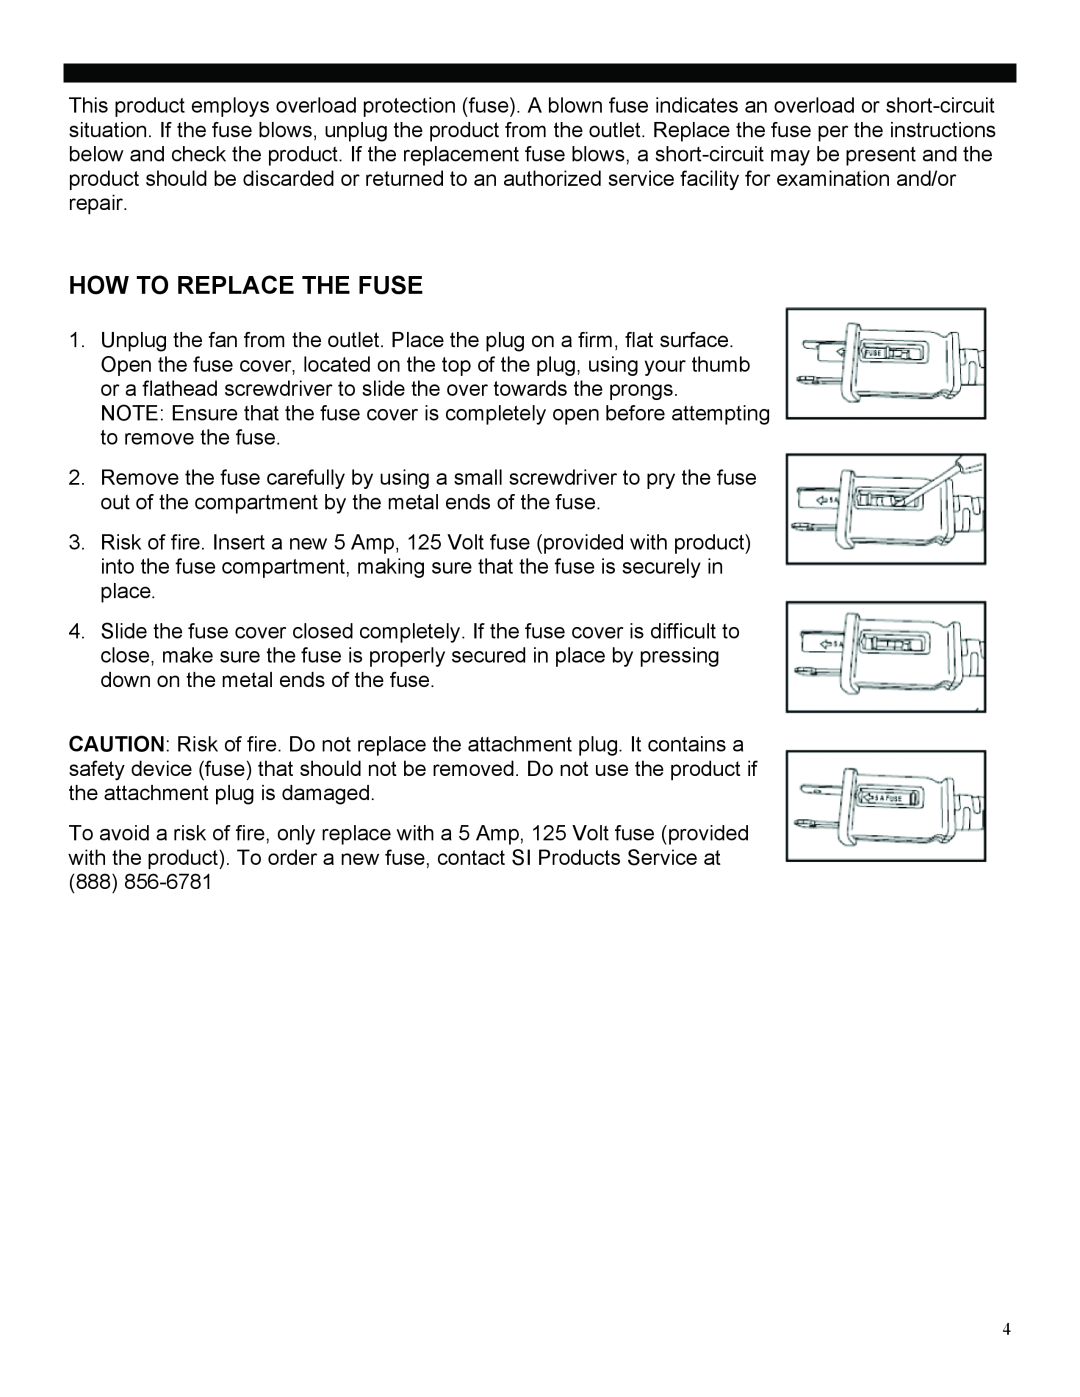 Soleus Air FF1-50-53 manual How To Replace The Fuse 